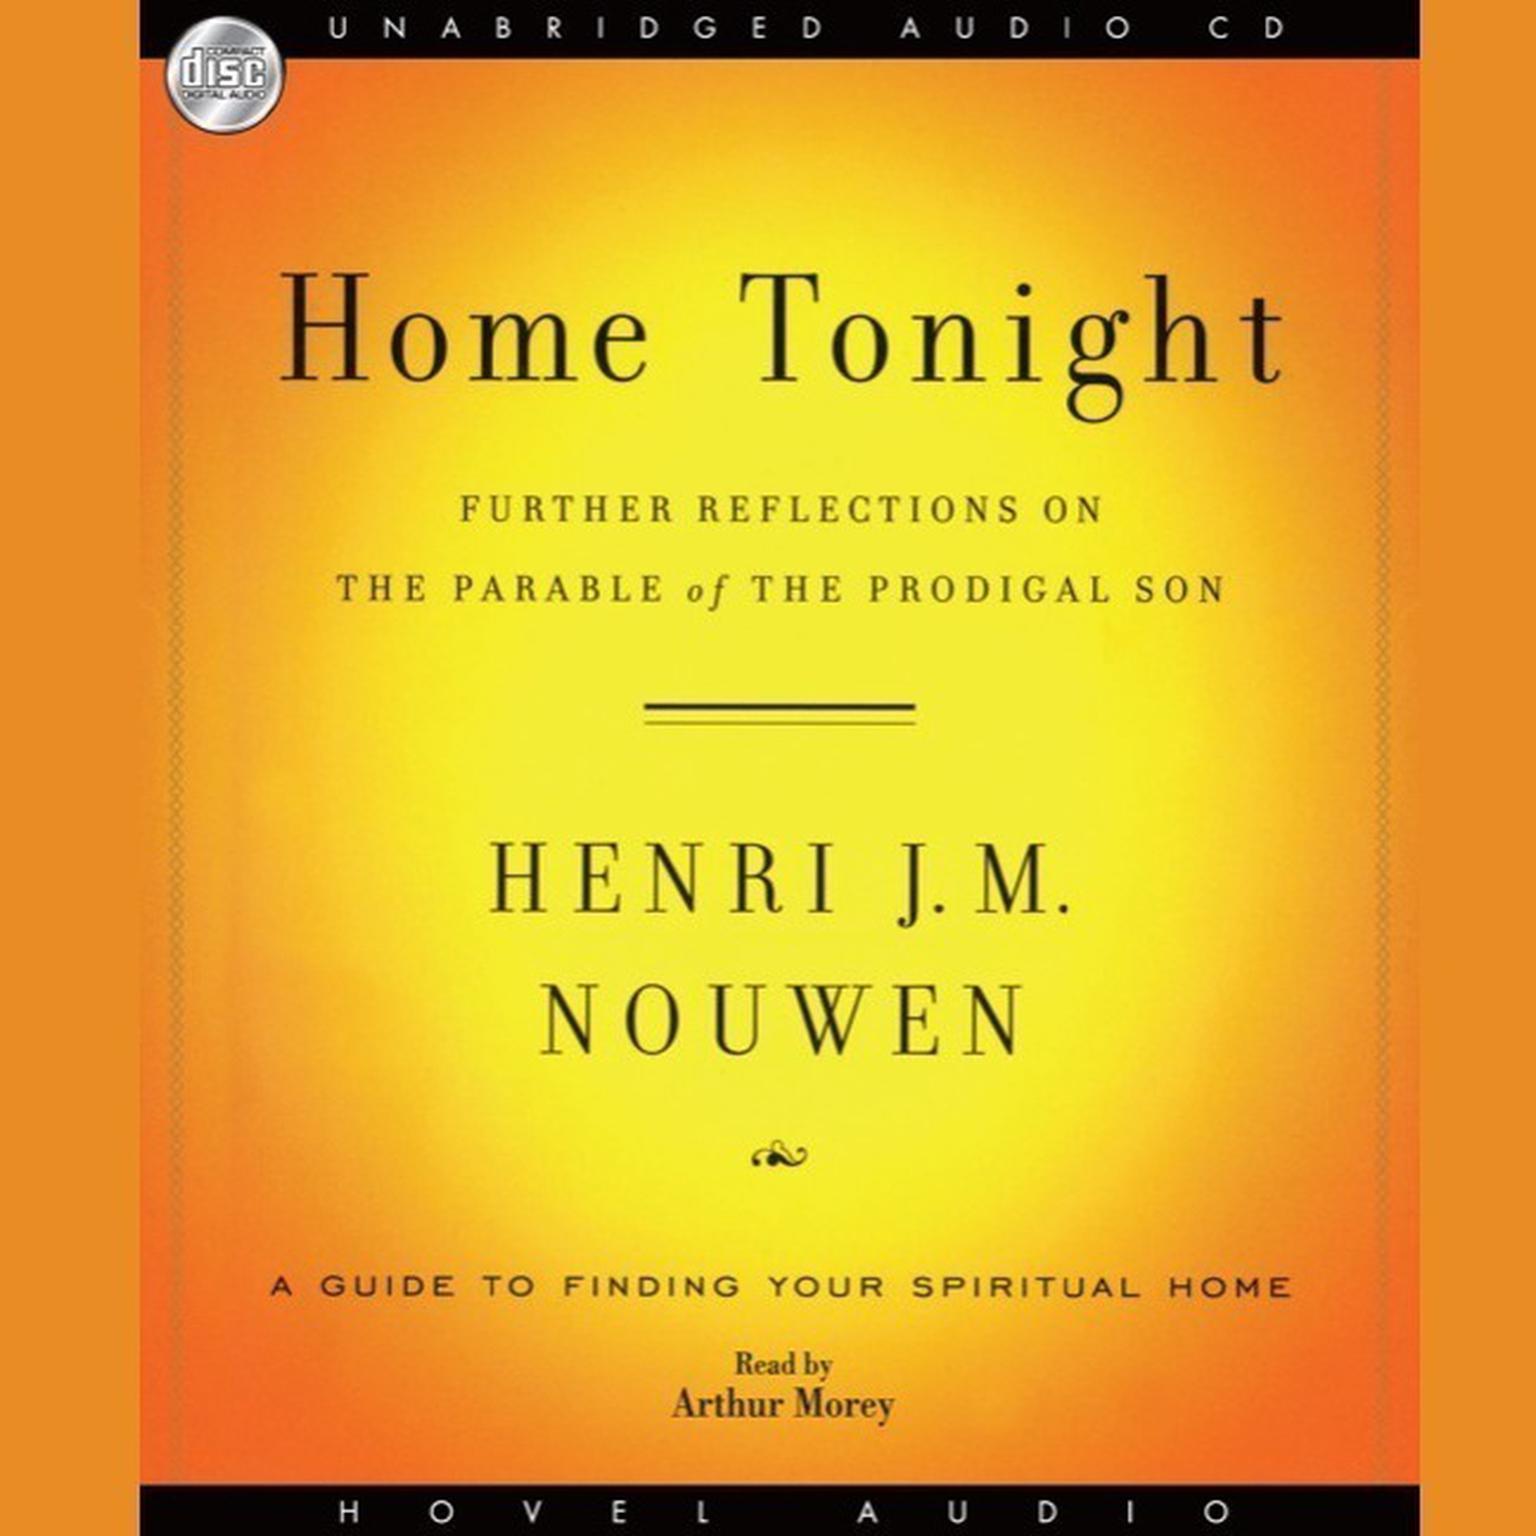 Home Tonight: Further reflections on the parable of the prodigal son Audiobook, by Henri J. M. Nouwen